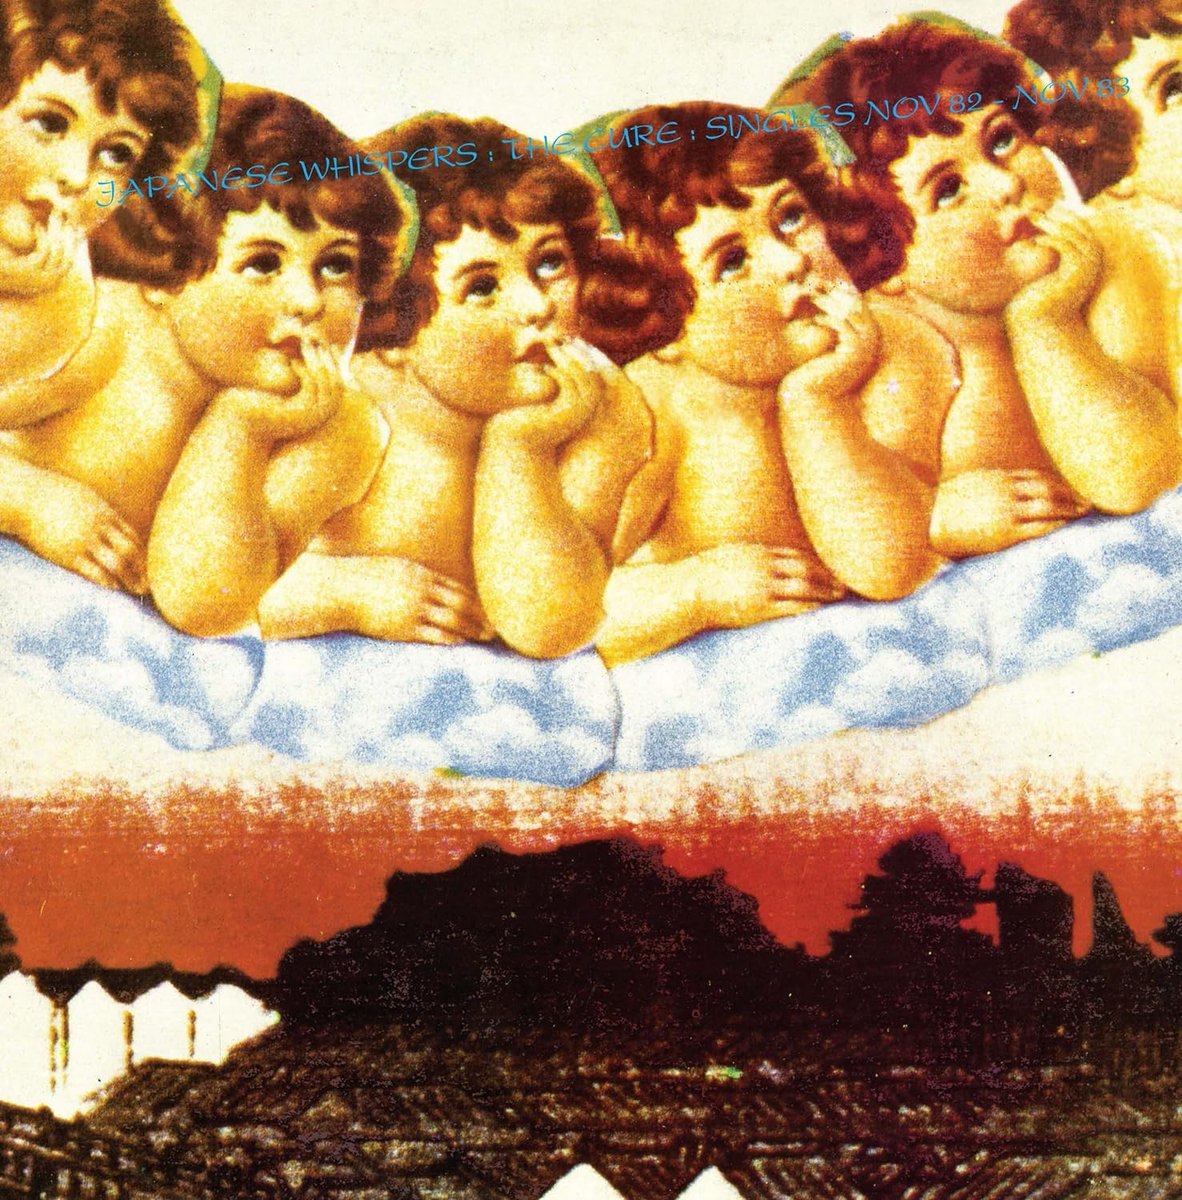 'Japanese Whispers,' @thecure's compilation of singles and B-sides from Nov 1982-1983, is getting reissued on vinyl! It will be available June 7th on clear vinyl and housed in a special Transclear sleeve with a printed inner bag. Pre-order it here: bit.ly/4dcRmrS